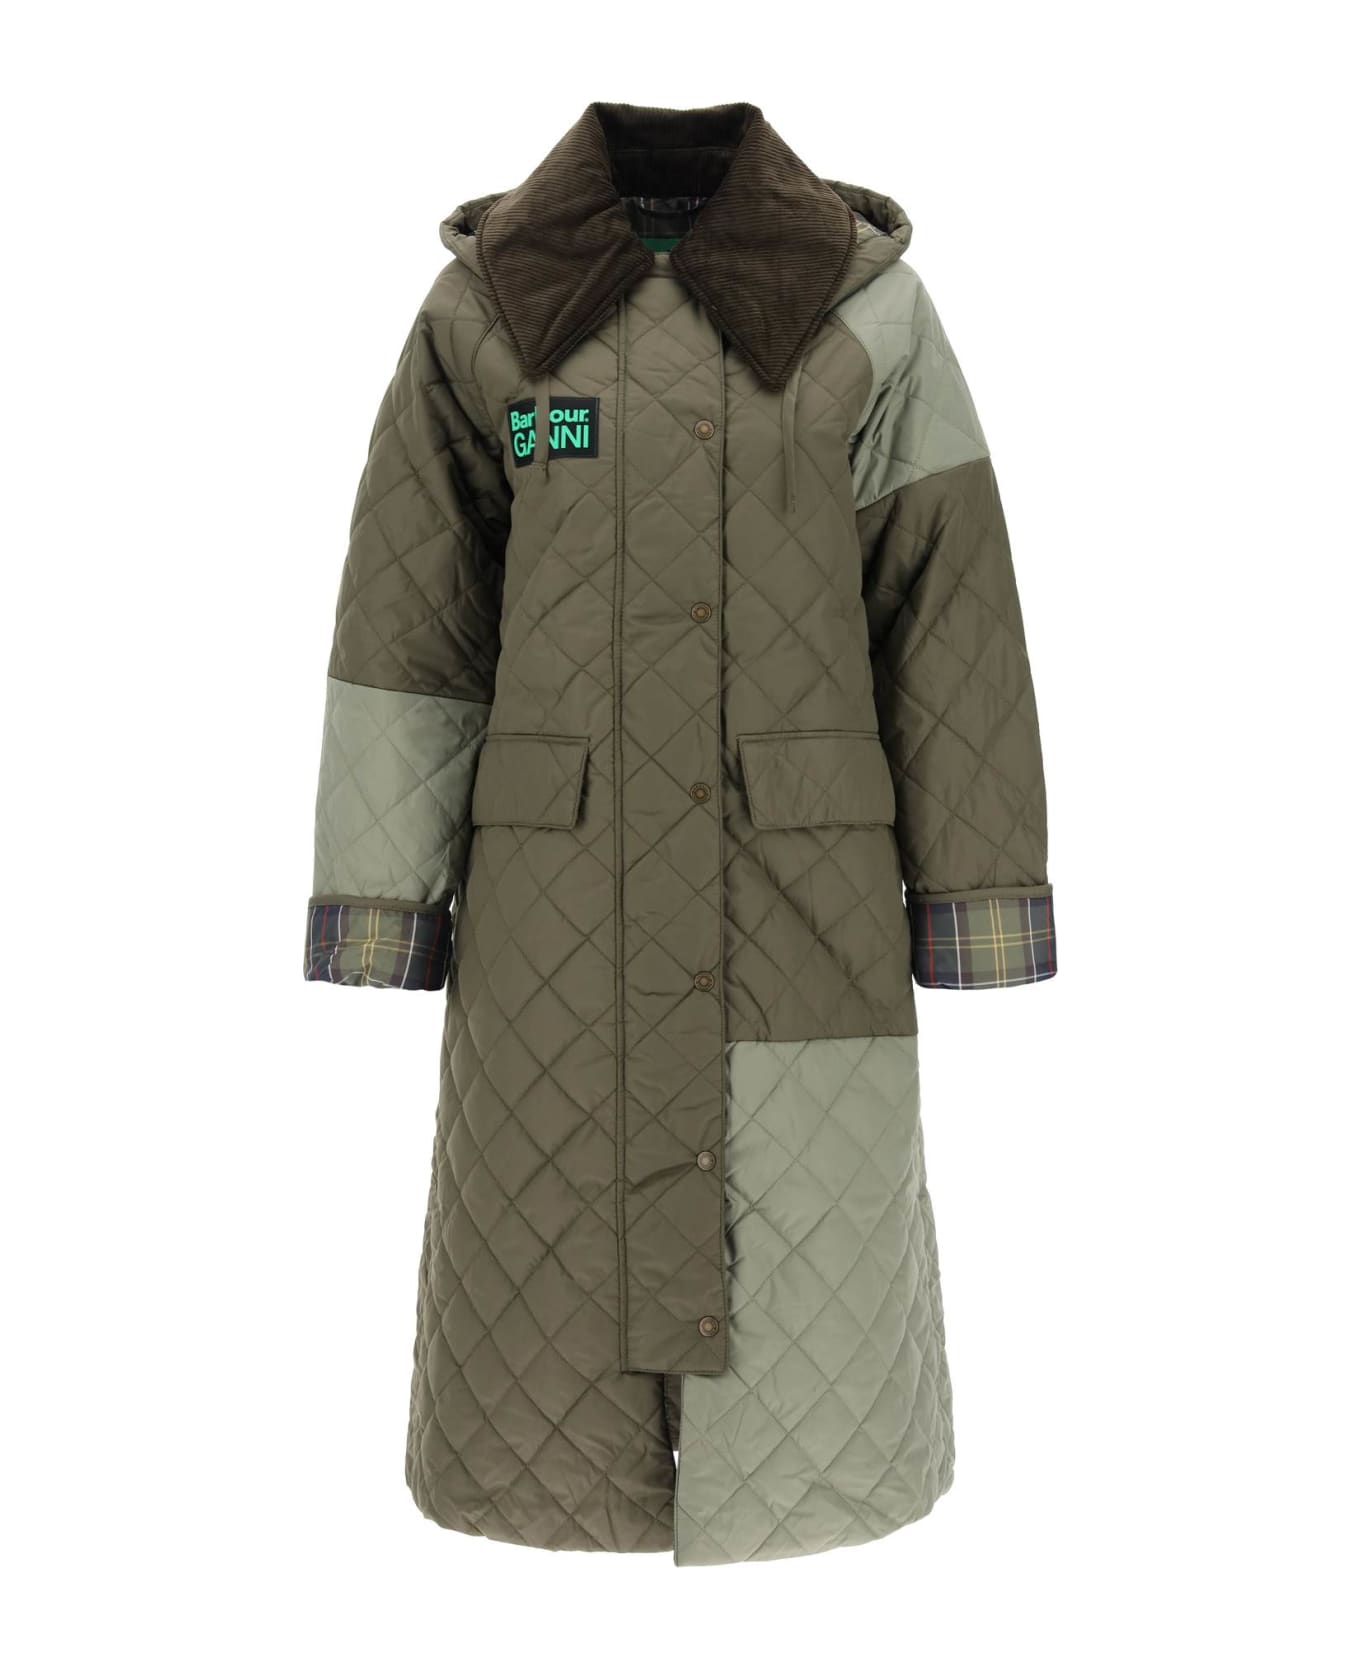 Barbour 'quilted Burghley' Long Down Jacket - FERN LT MOSS CLASSIC (Green)